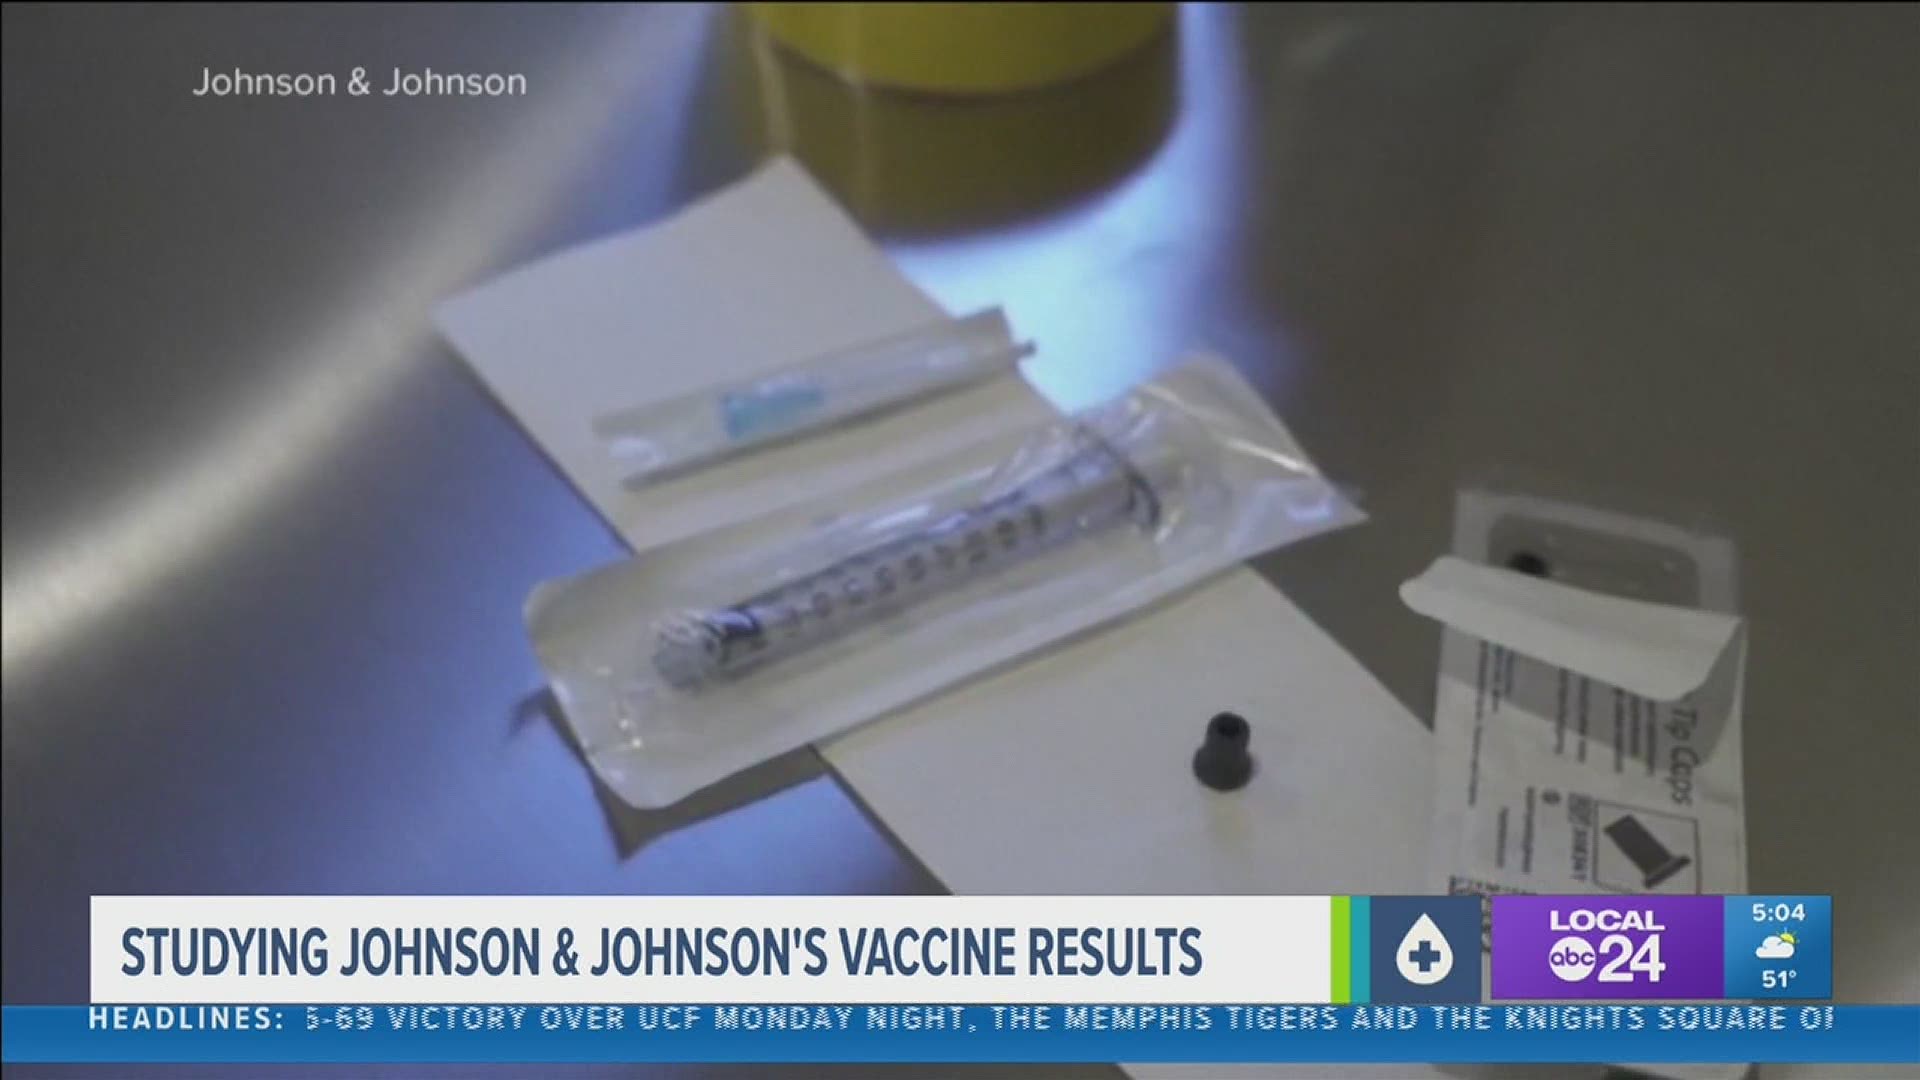 By the end of the week, drug maker Johnson and Johnson is expected submit its COVID-19 vaccine to the FDA for emergency use authorization.